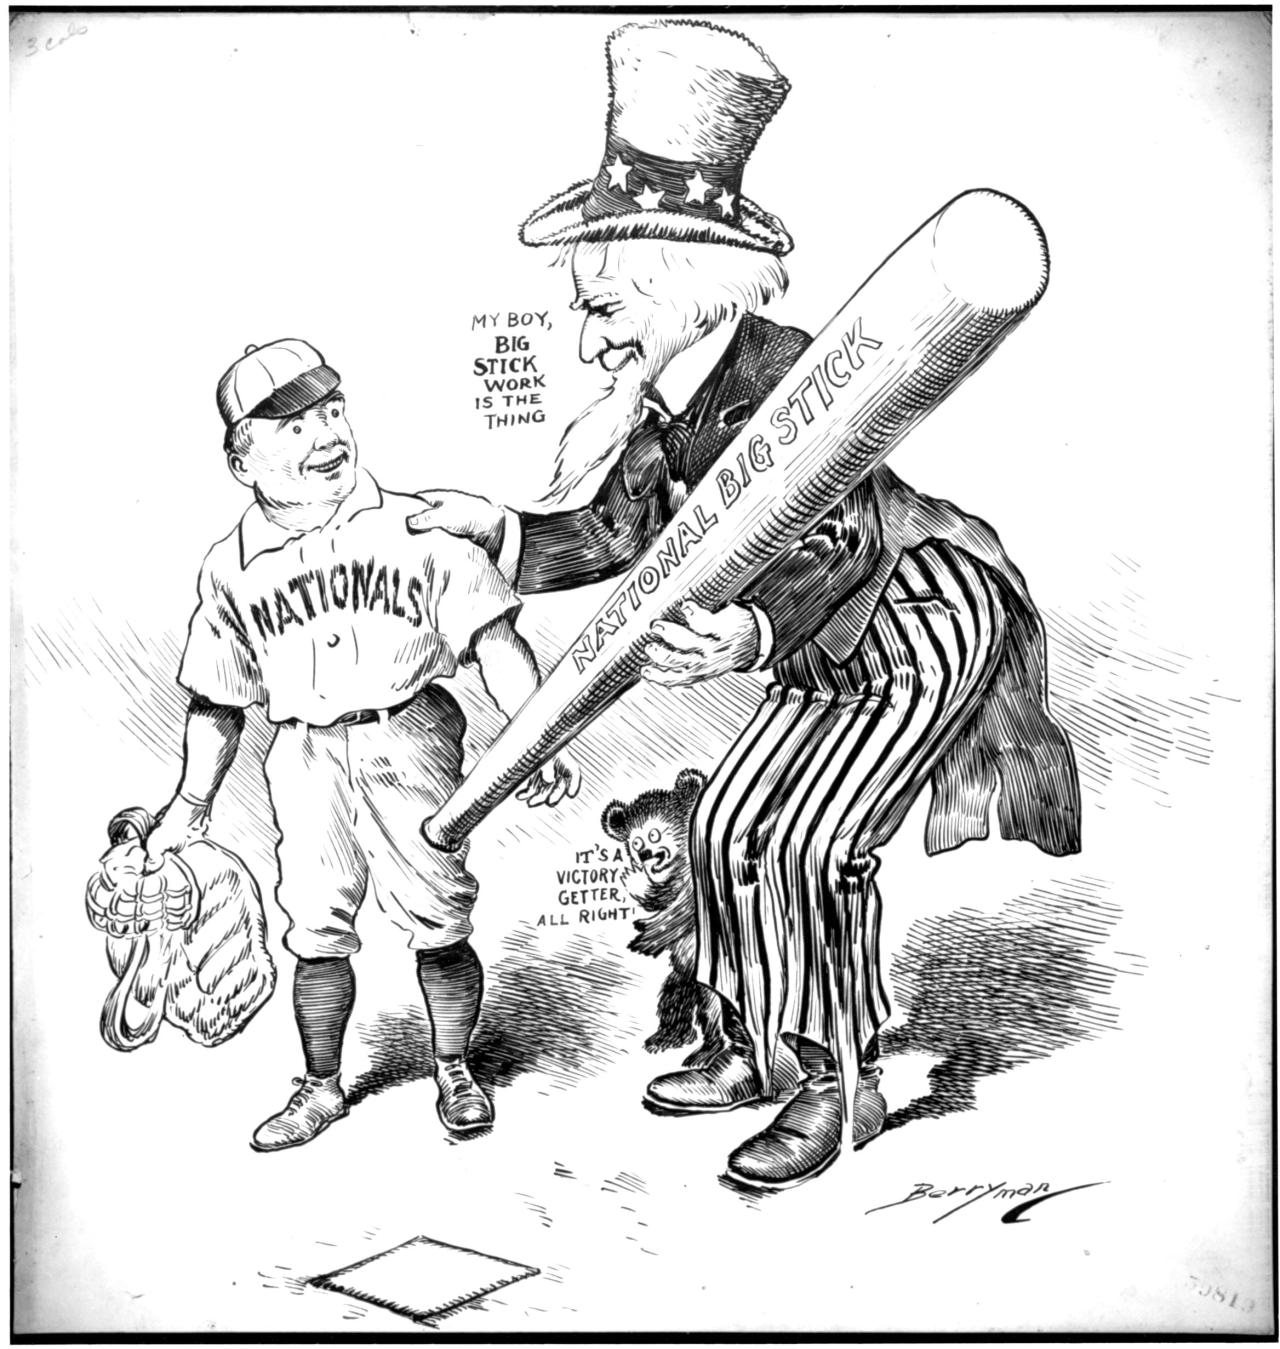 Cheering for the home team tonight! Let’s go Nats!!
Untitled by Clifford K. Berryman, 4/10/1907; U.S. Senate Collection (NAID 6010700)